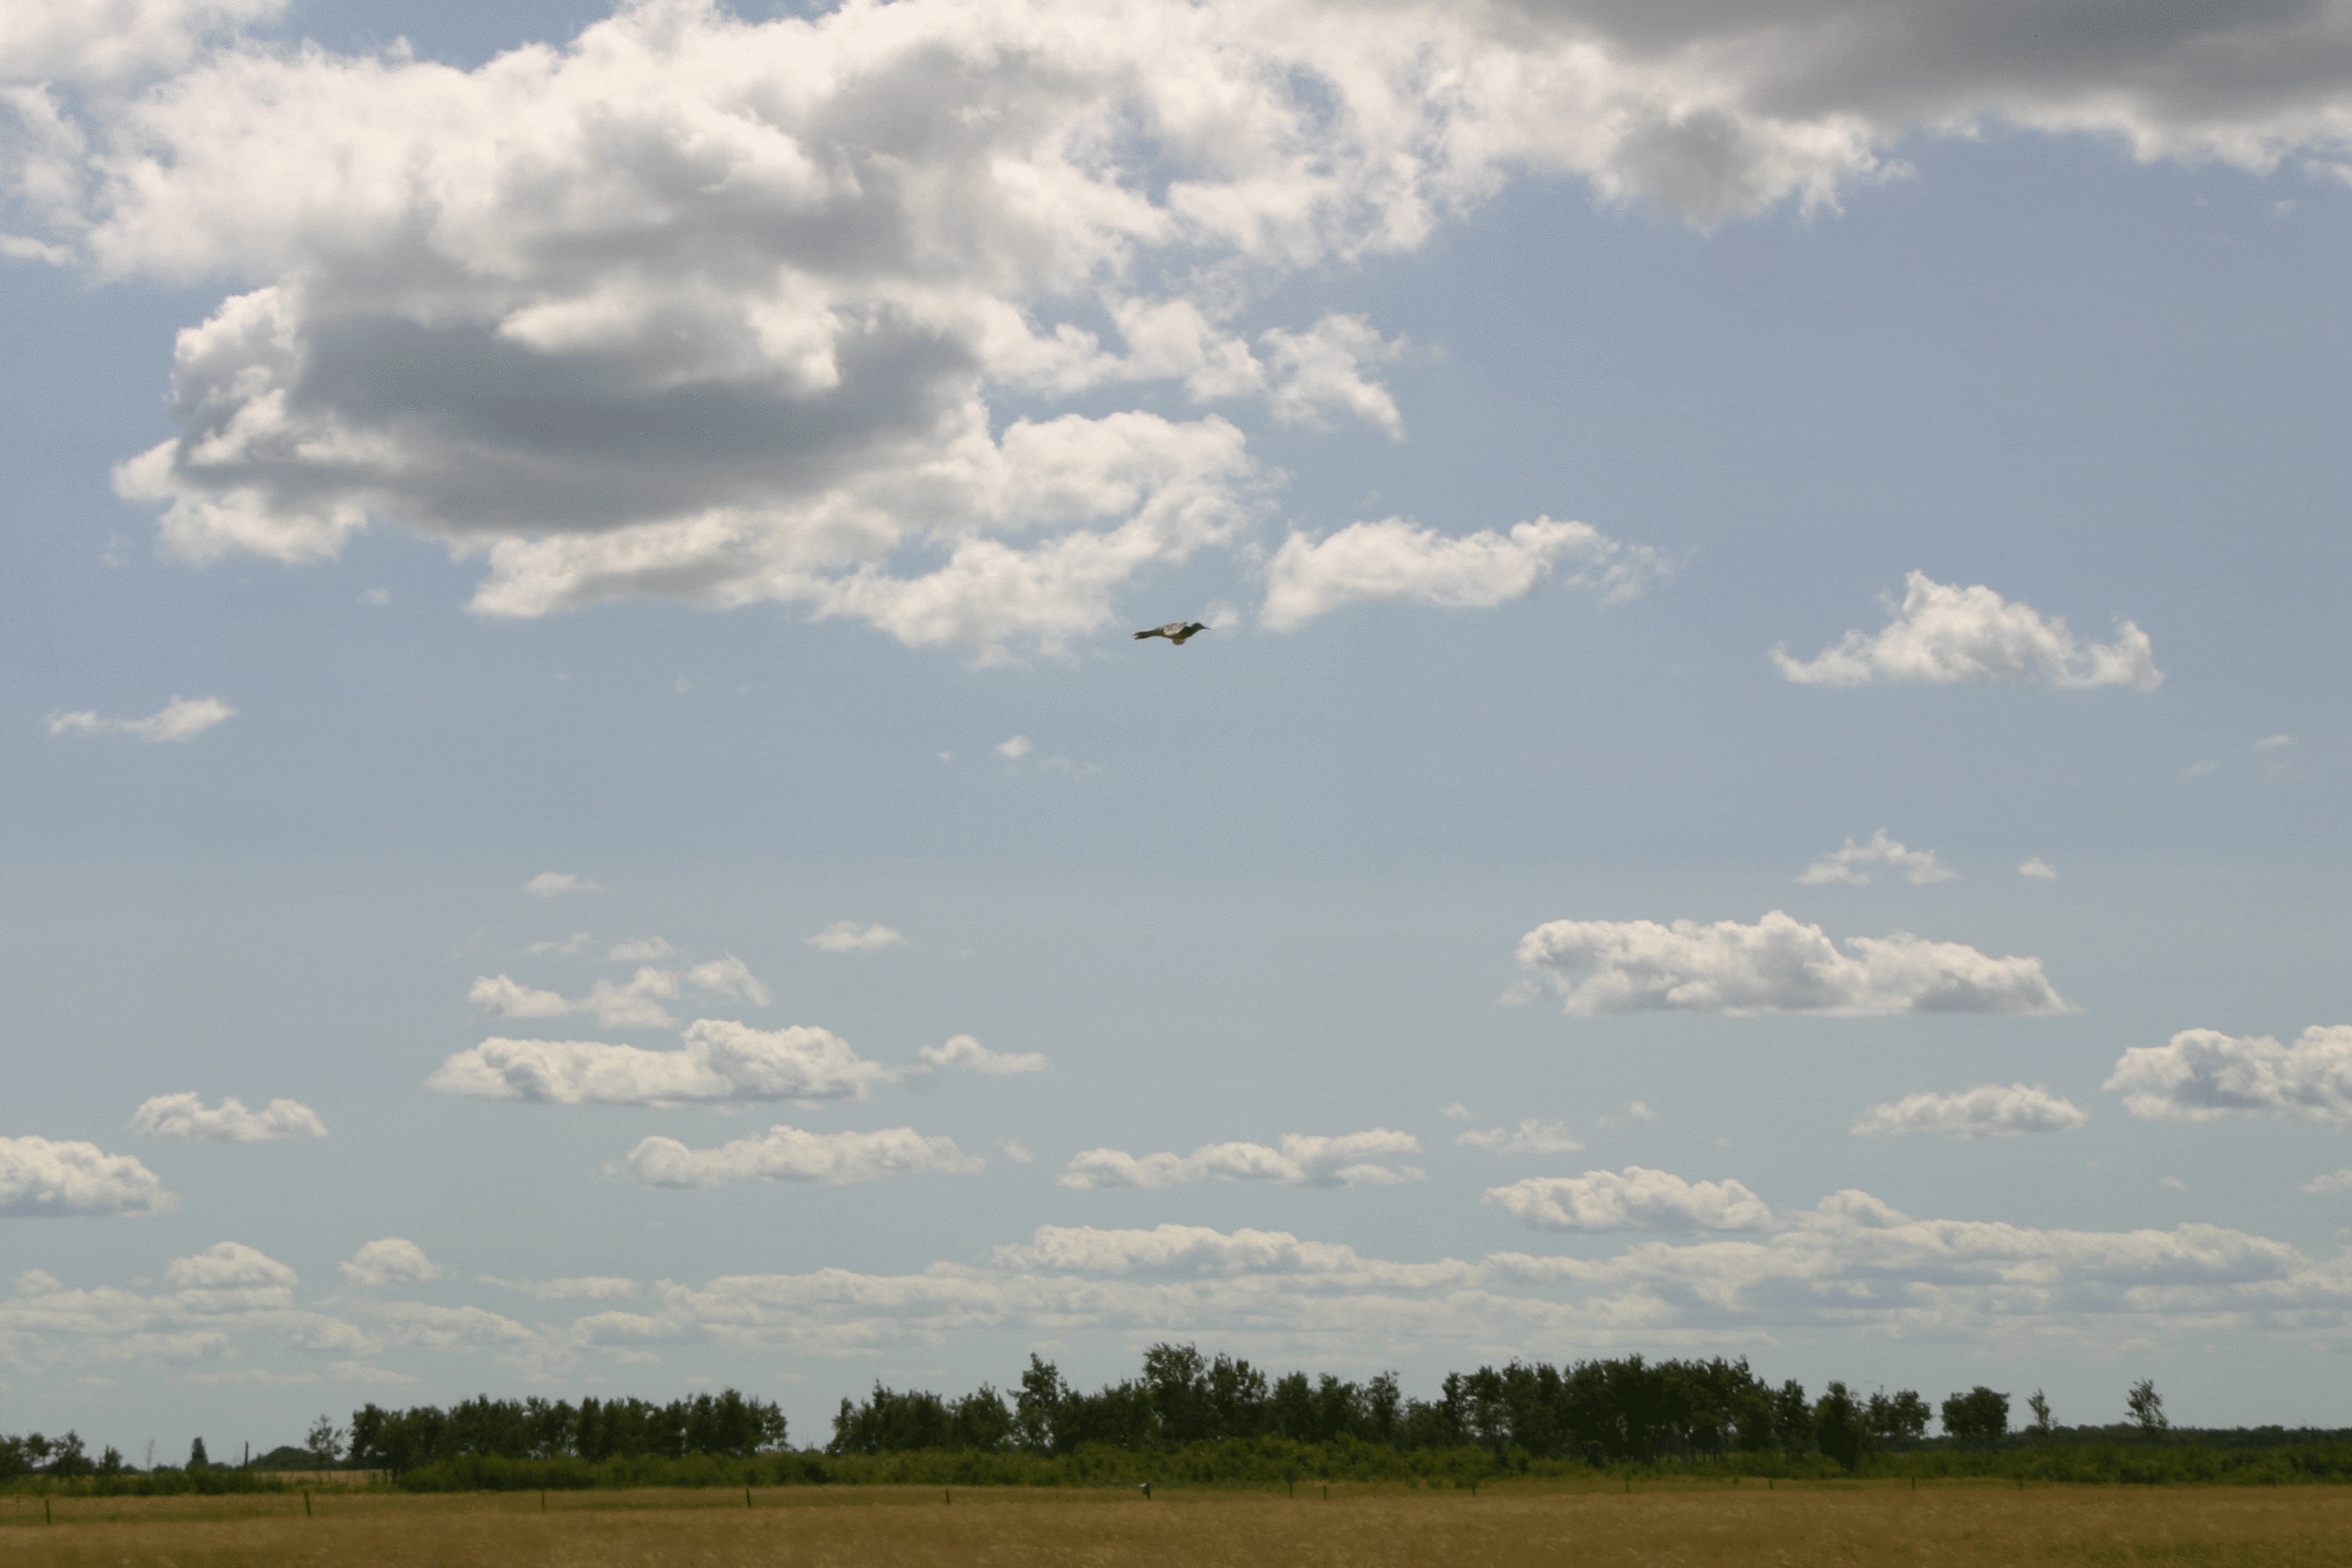 A high-flying bird, soaring over a field against a blue sky with scattered white clouds.